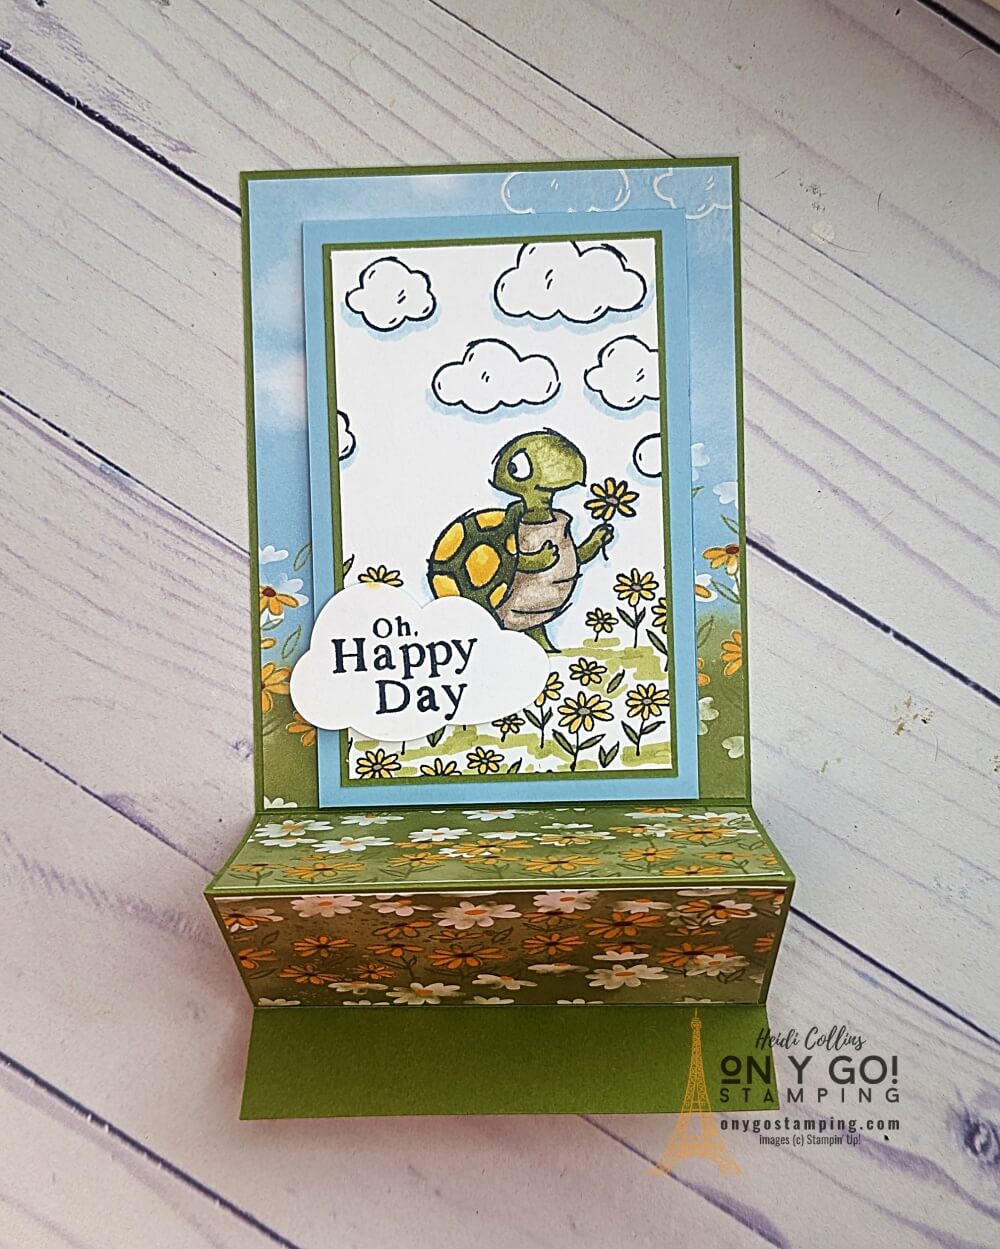 Take advantage of the great outdoors with this fun fold card! Featuring the Playing in the Rain stamp set from Stampin' Up!, and beautiful Rain or Shine patterned paper, you'll be able to craft an artful card perfect for any occasion. Whether you are celebrating a special day or just saying hello, this card is sure to fit the mood. And, with its fun fold design, you'll be able to make a meaningful statement that won't soon be forgotten.